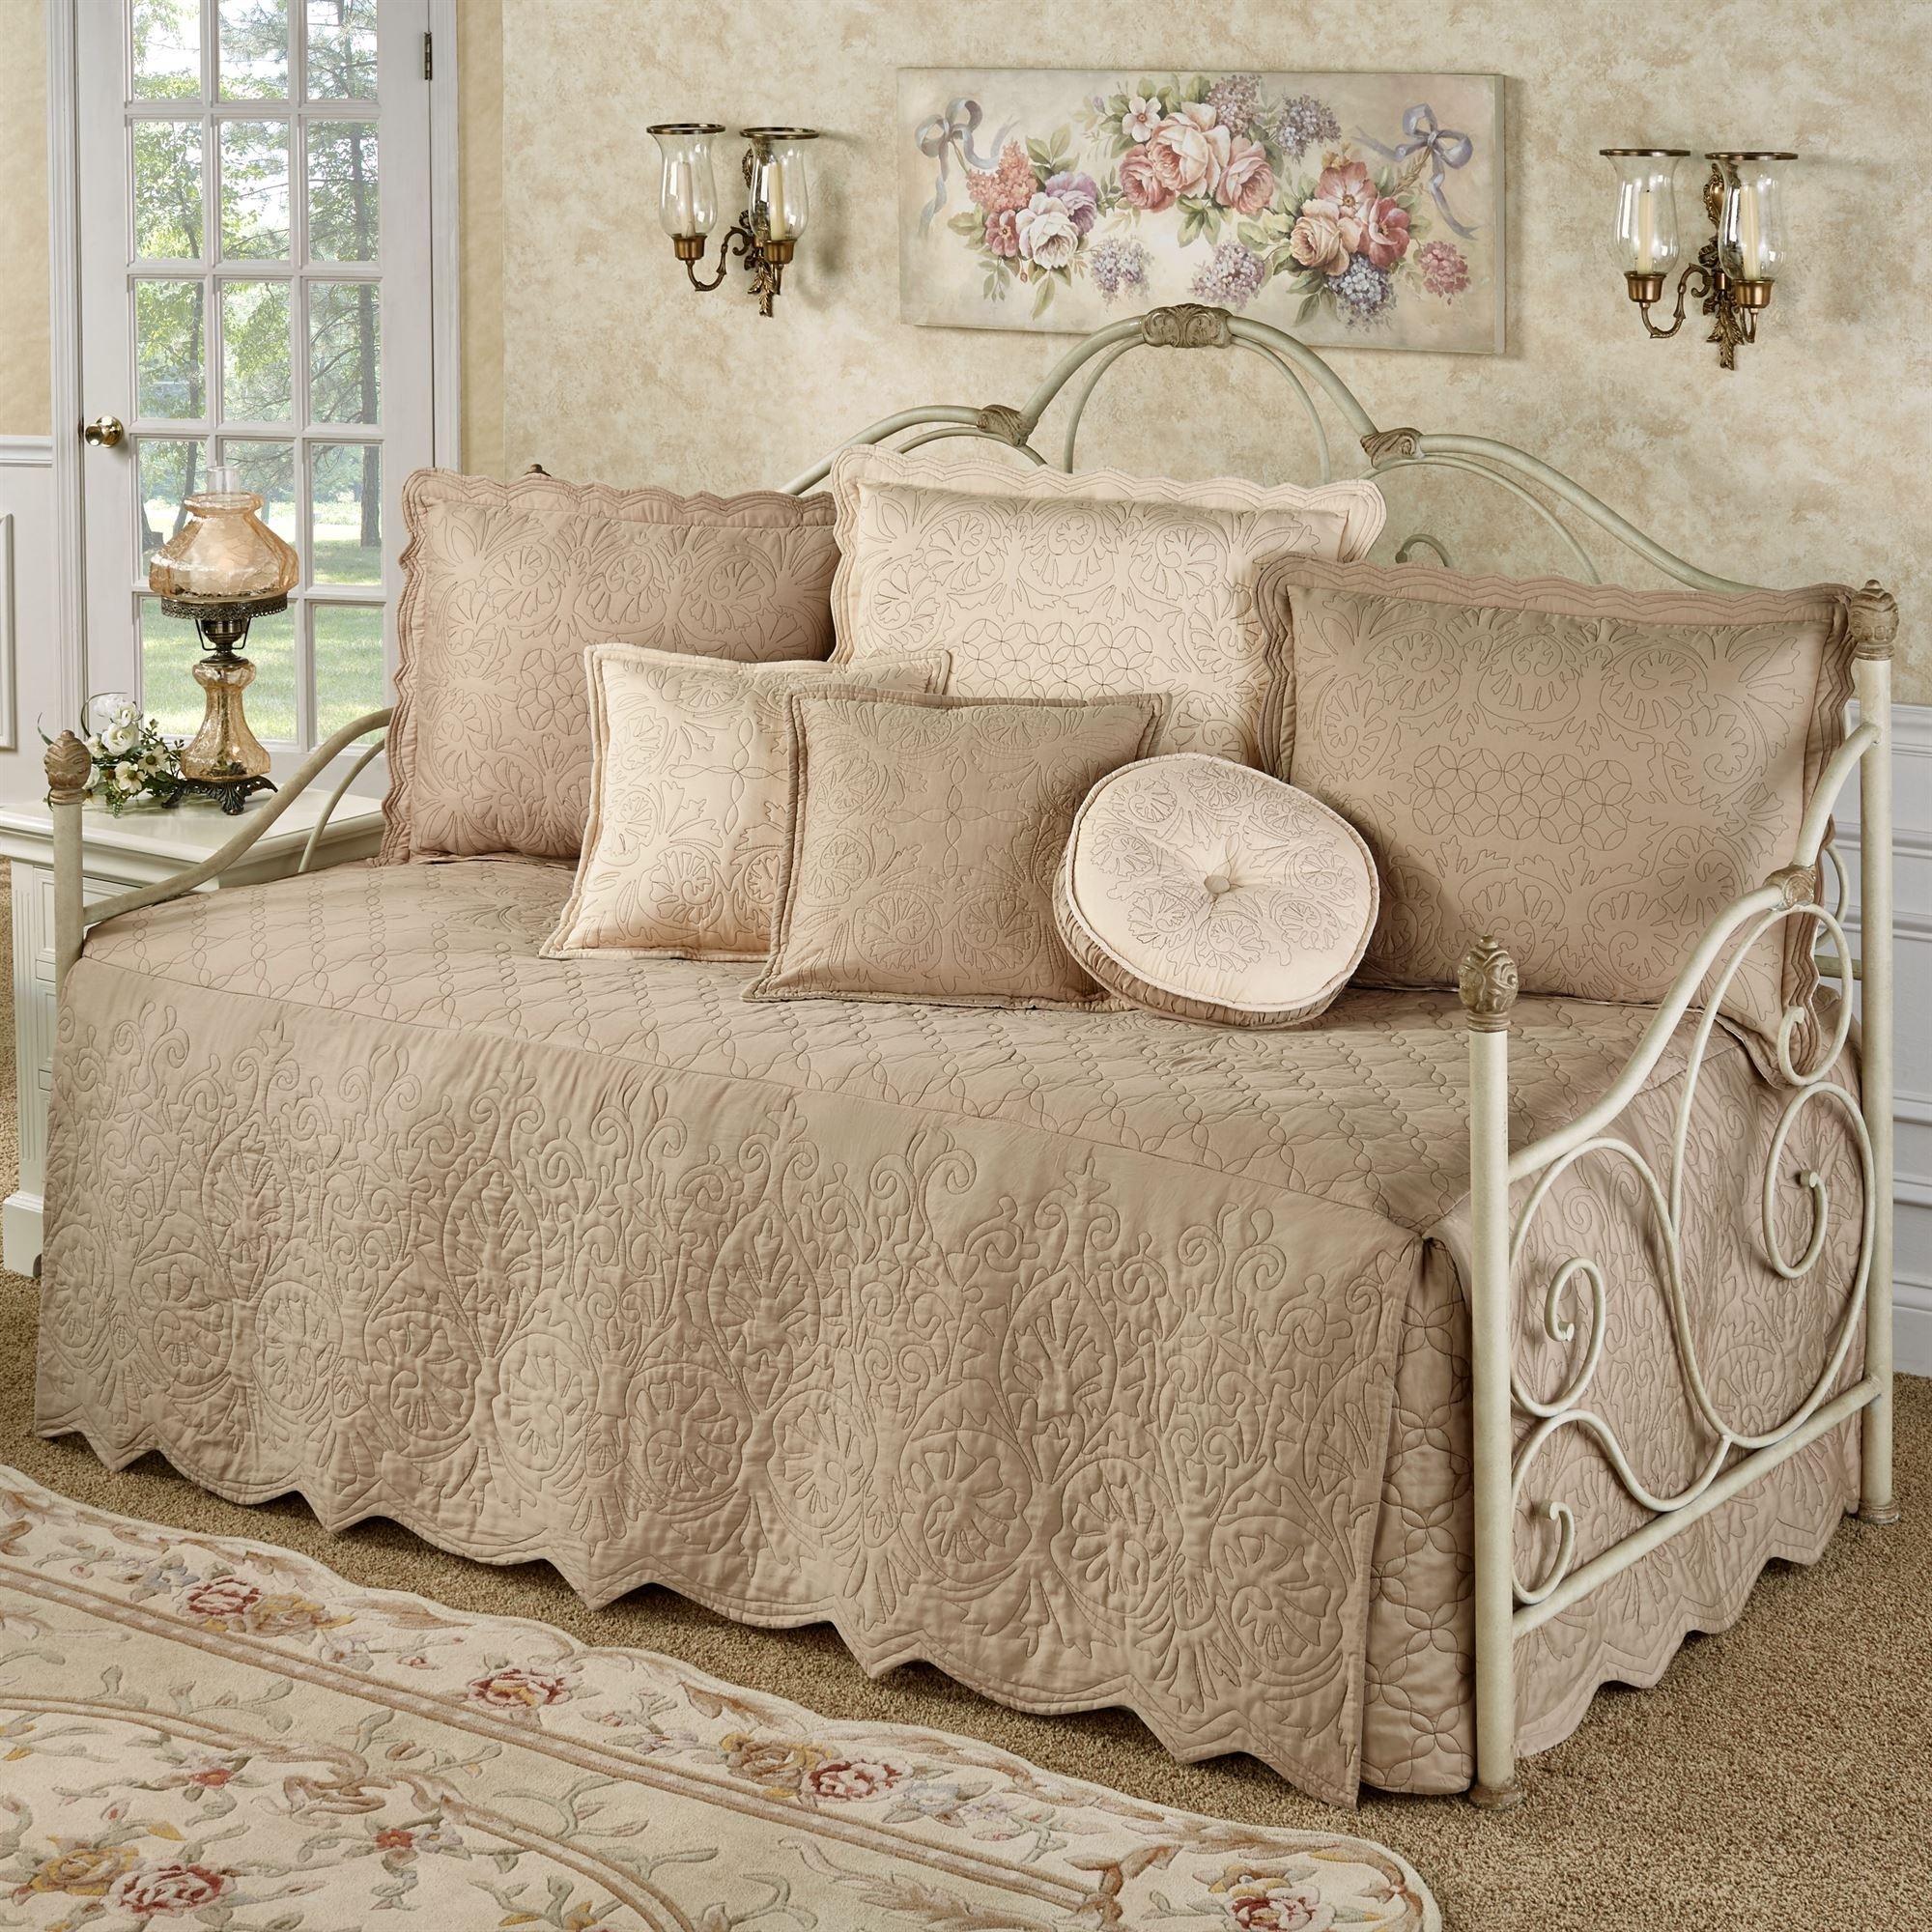 Everafter almond quilted daybed bedding set